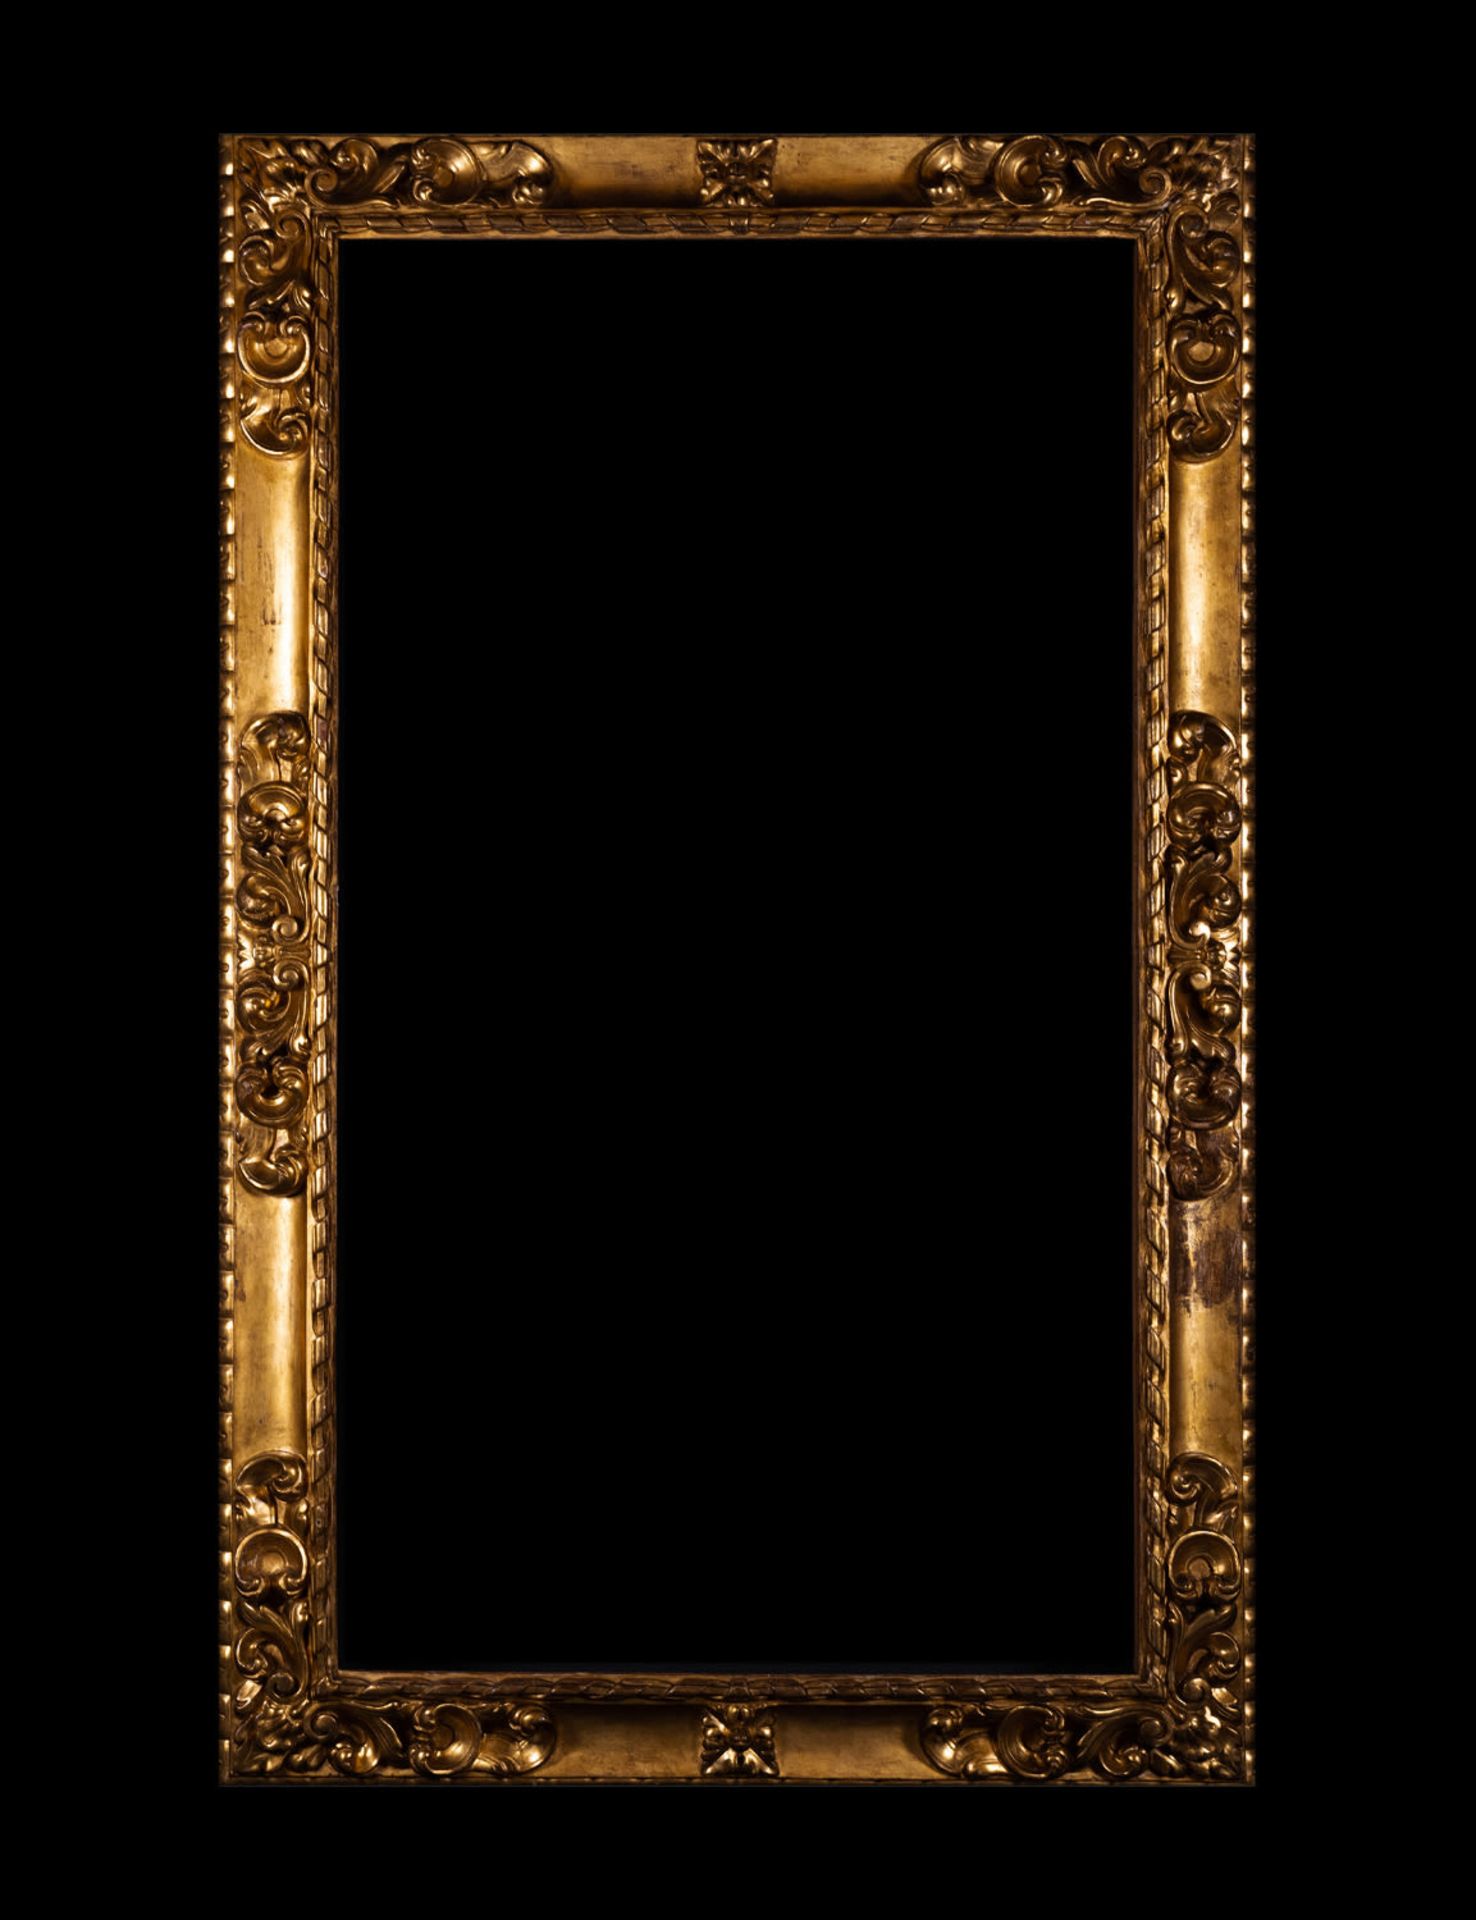 Important Baroque frame in gilt wood, 18th century